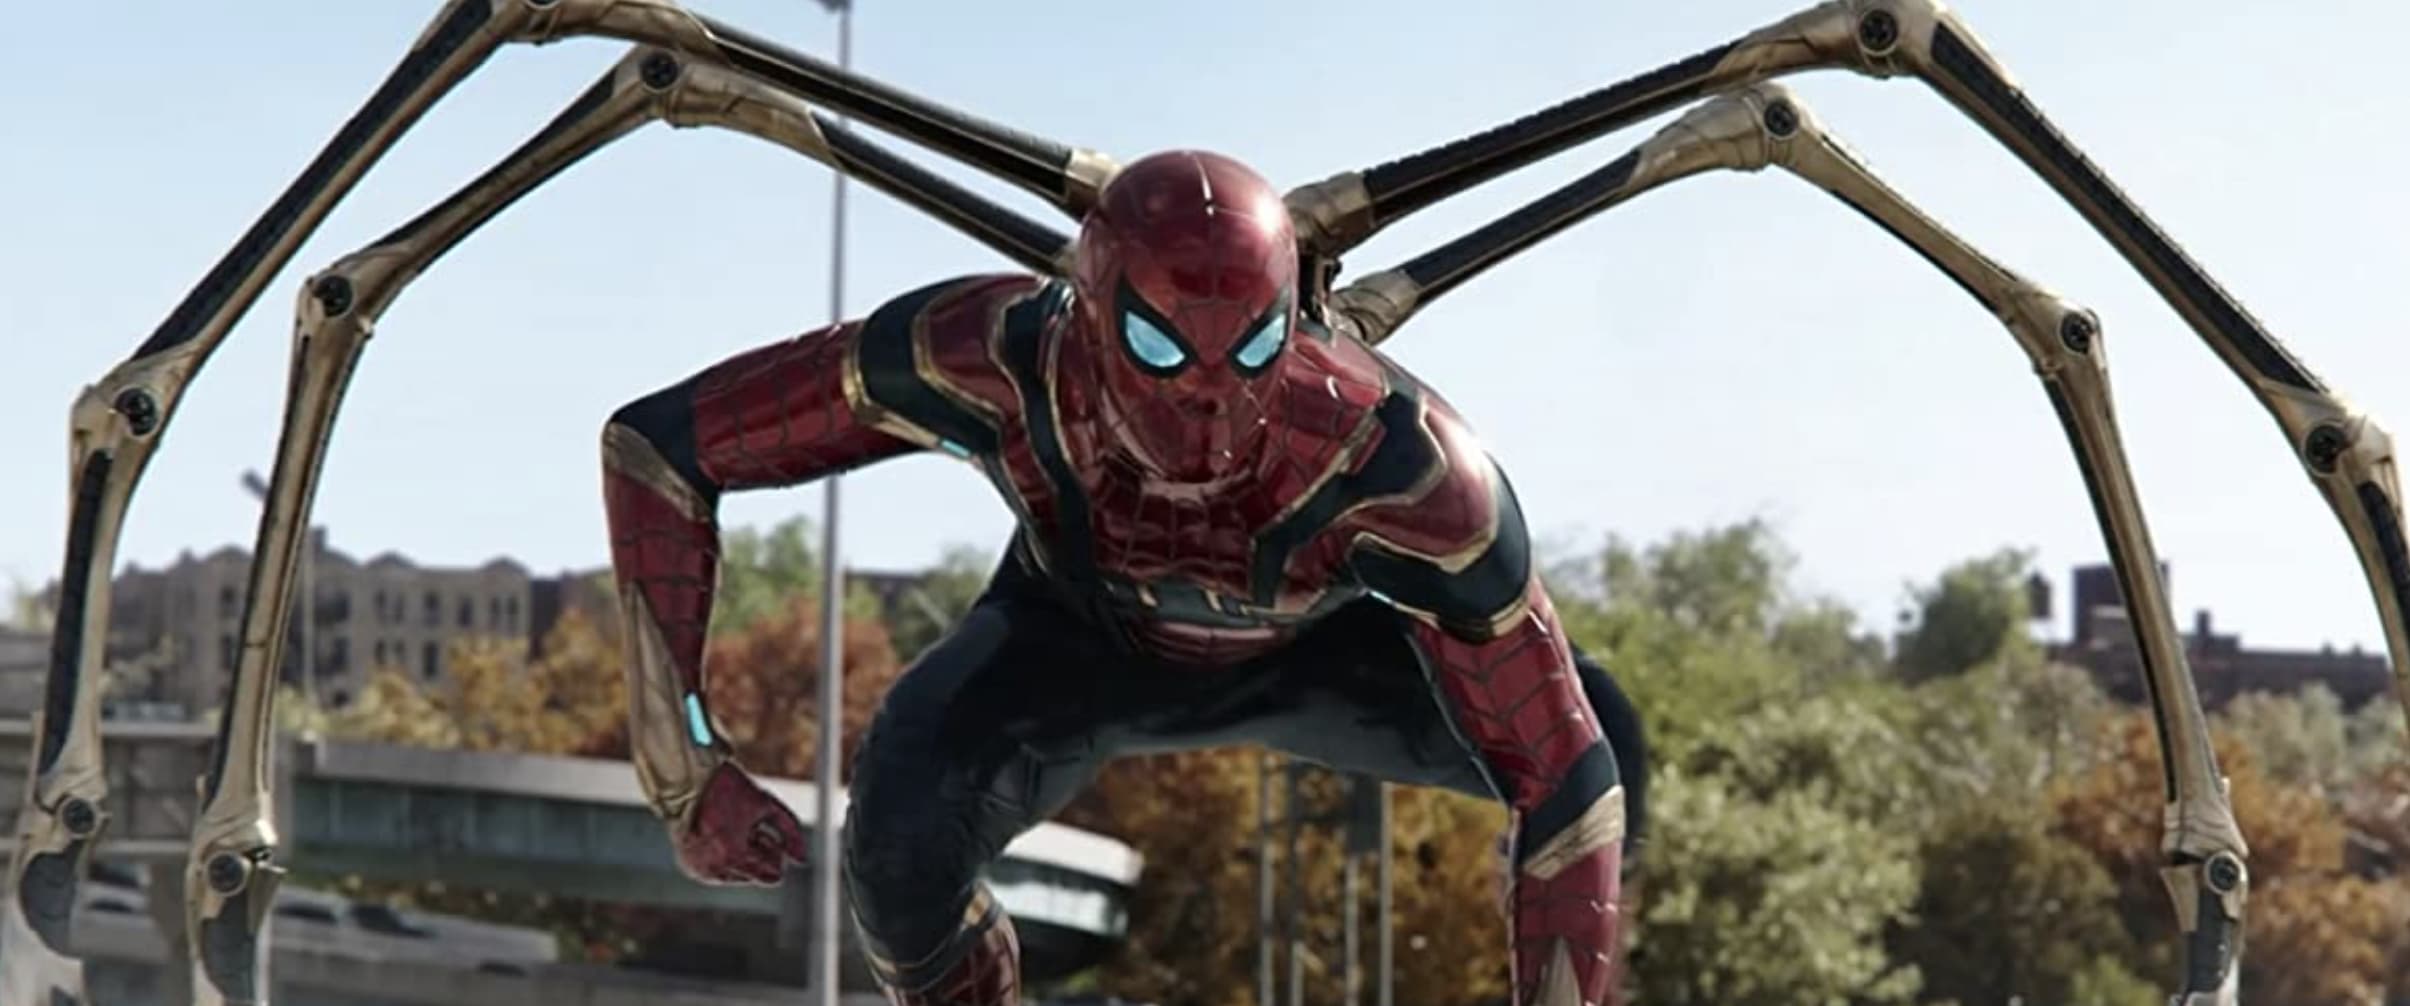 Spider Costume in The Amazing Spider 2 with 3D Emblems